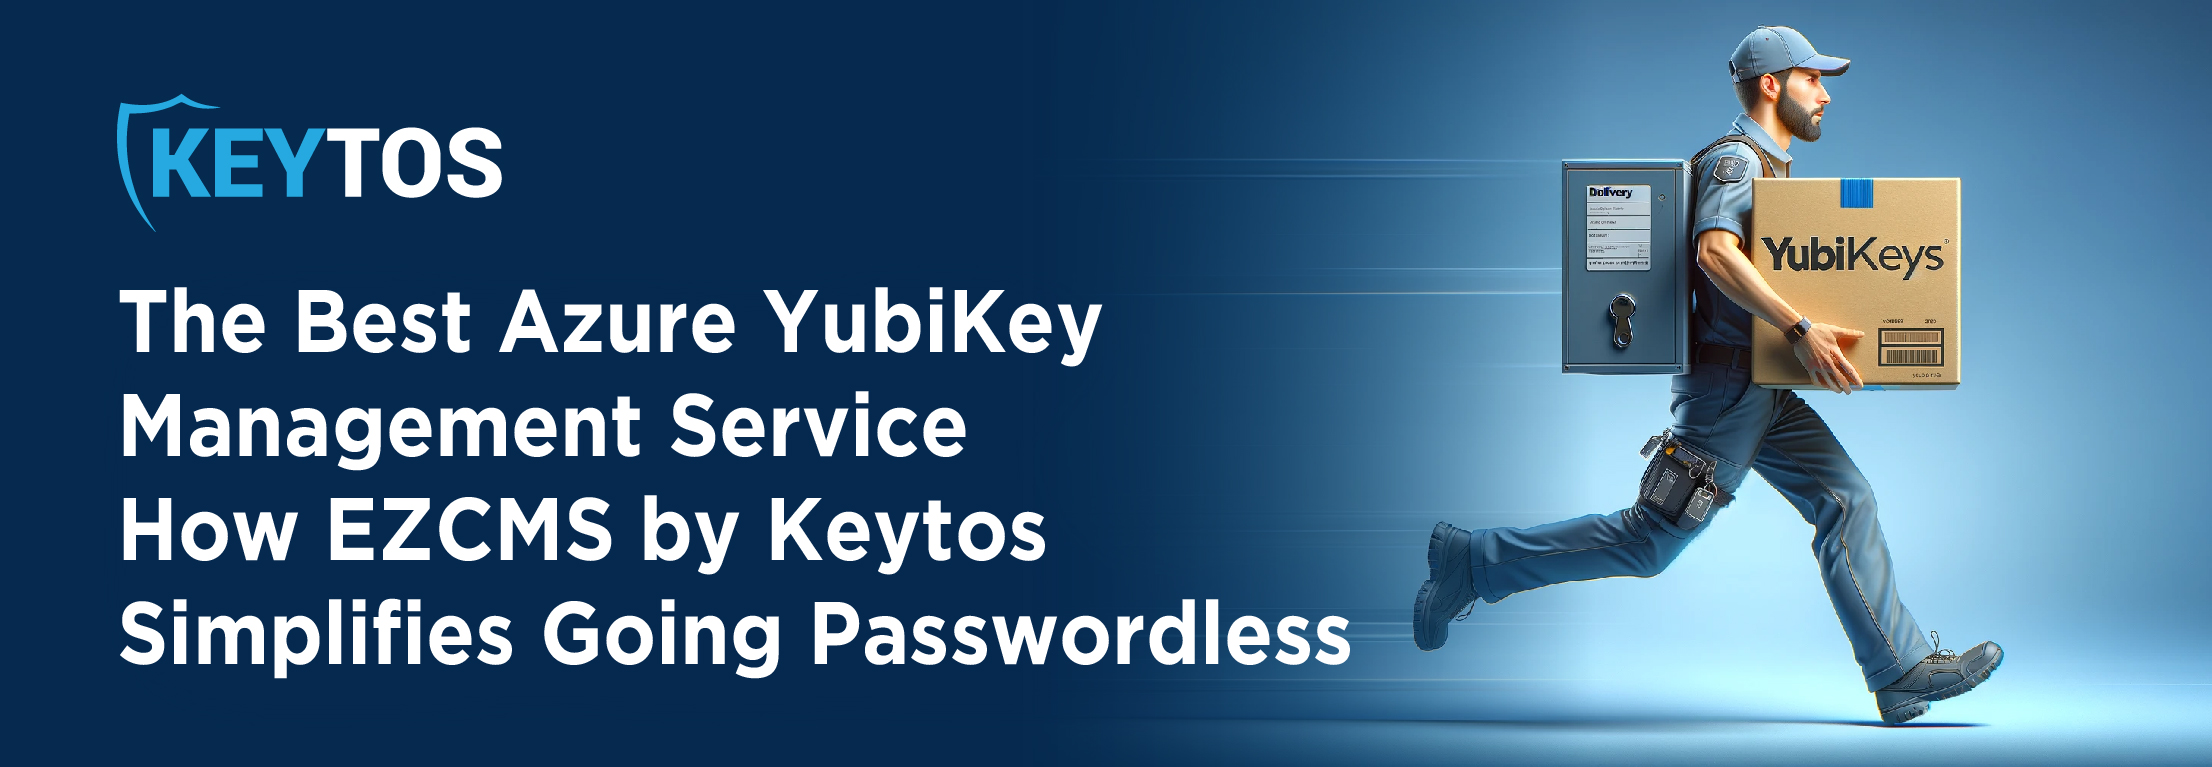 How To Ship YubiKeys Worldwide With Ease and implement passwordless for remote users